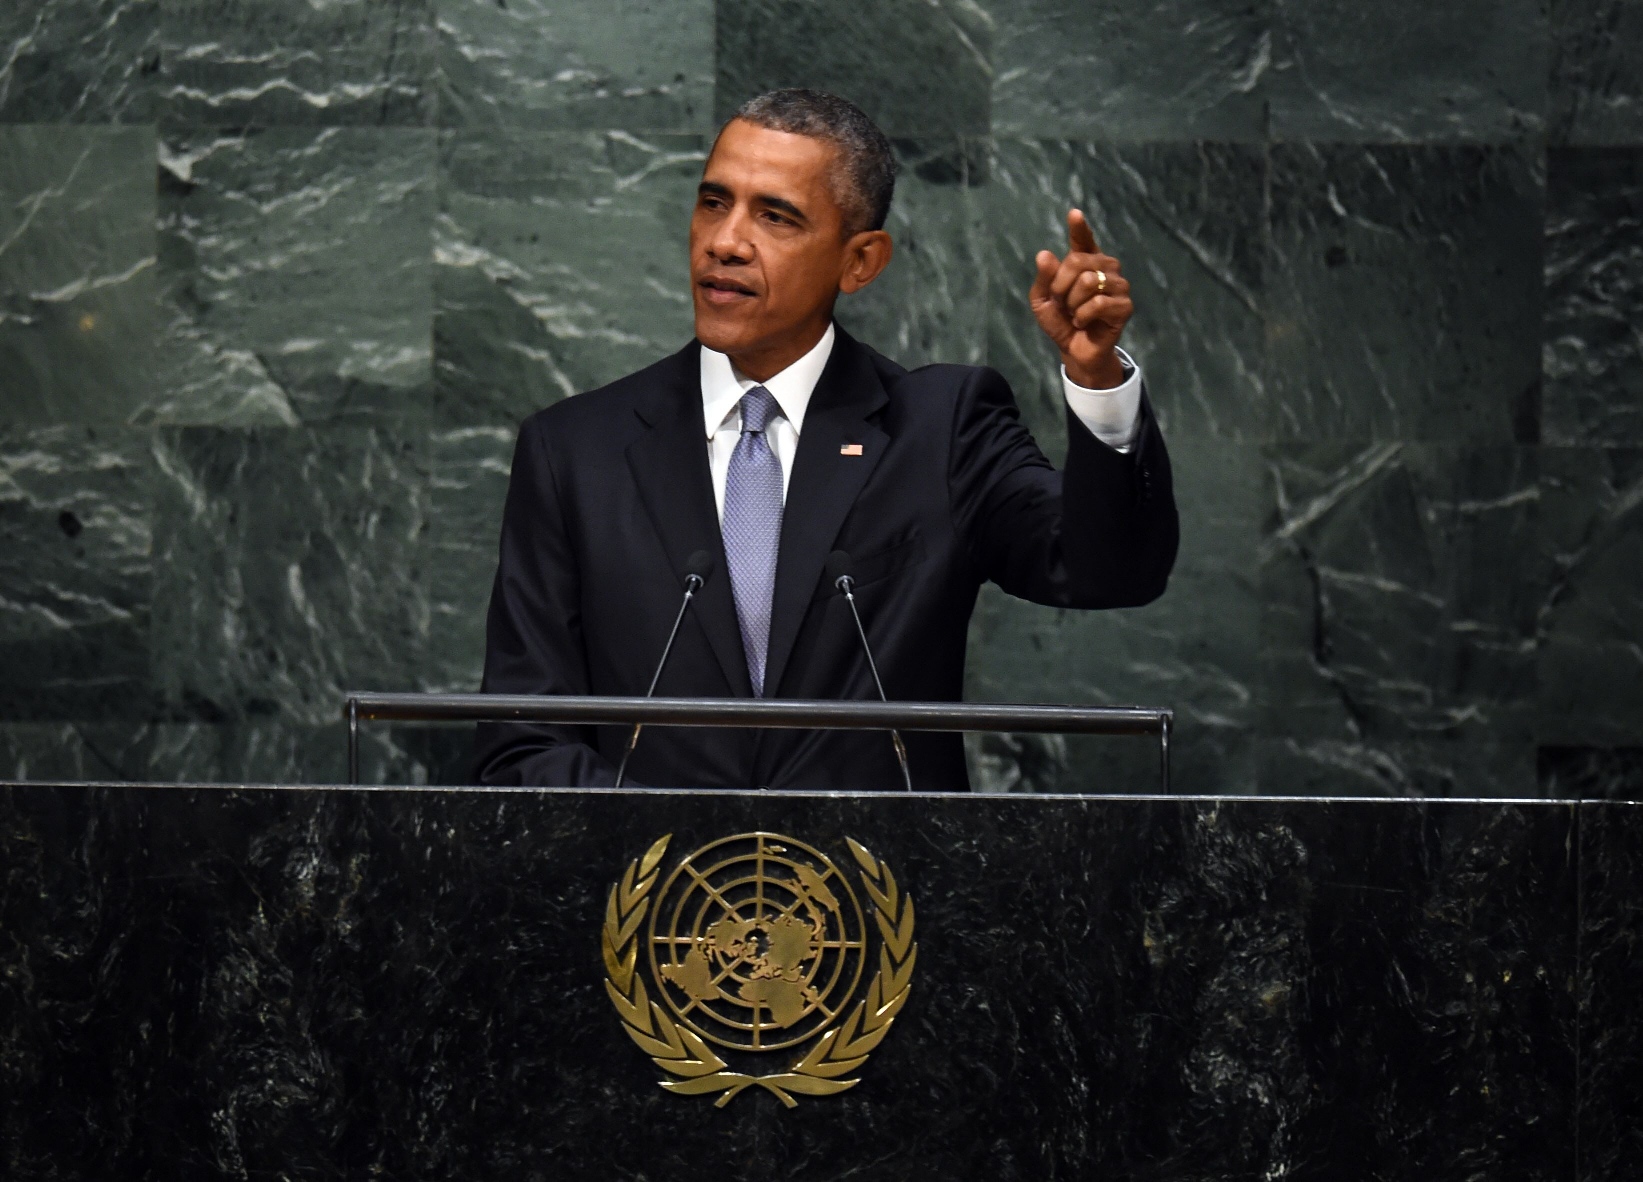 us president barack obama addresses the 70th session of the un general assembly september 28 2015 at the united nations in new york photo afp